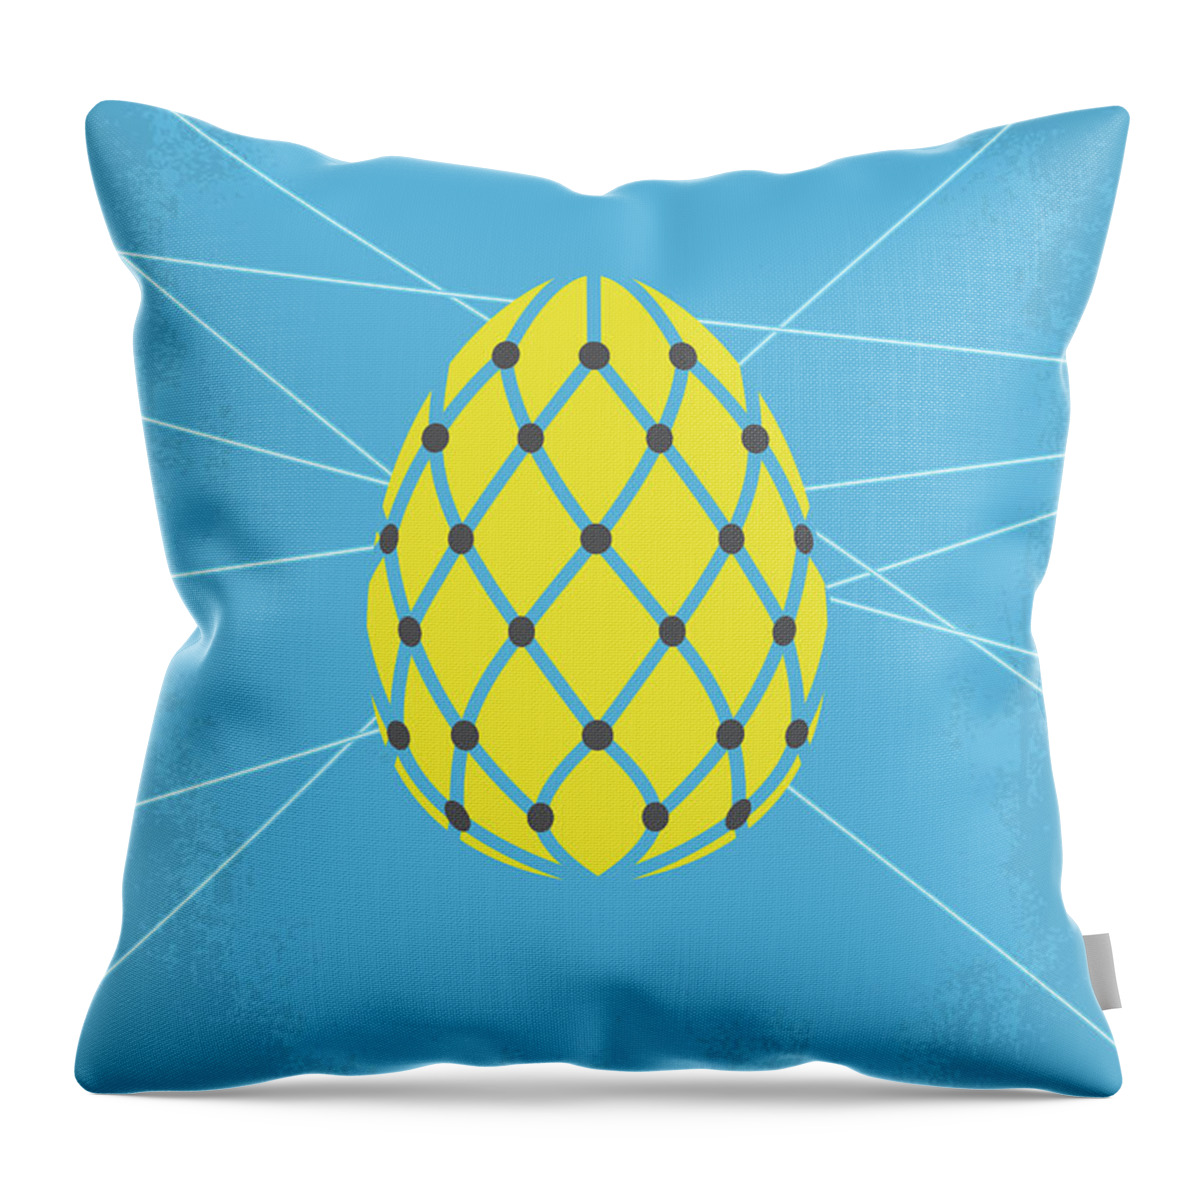 Oceans 12 Throw Pillow featuring the digital art No057 My Oceans 12 minimal movie poster by Chungkong Art